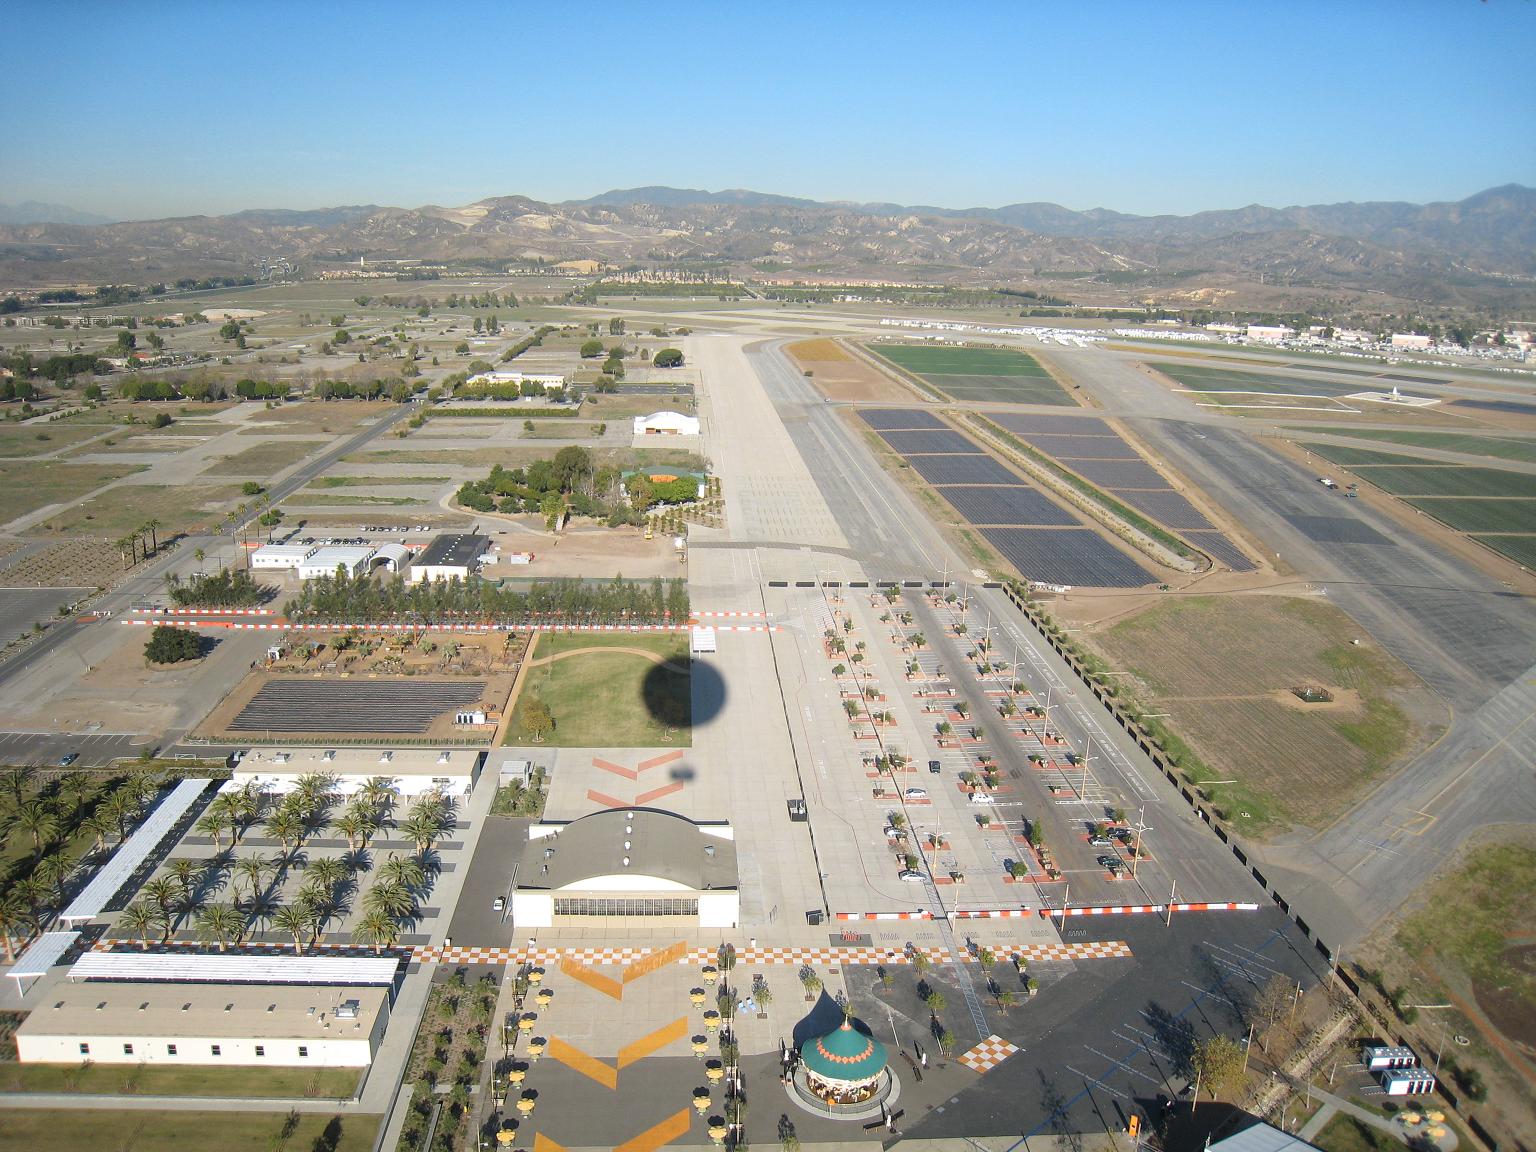 Photo of an air strip with mountains in the background.